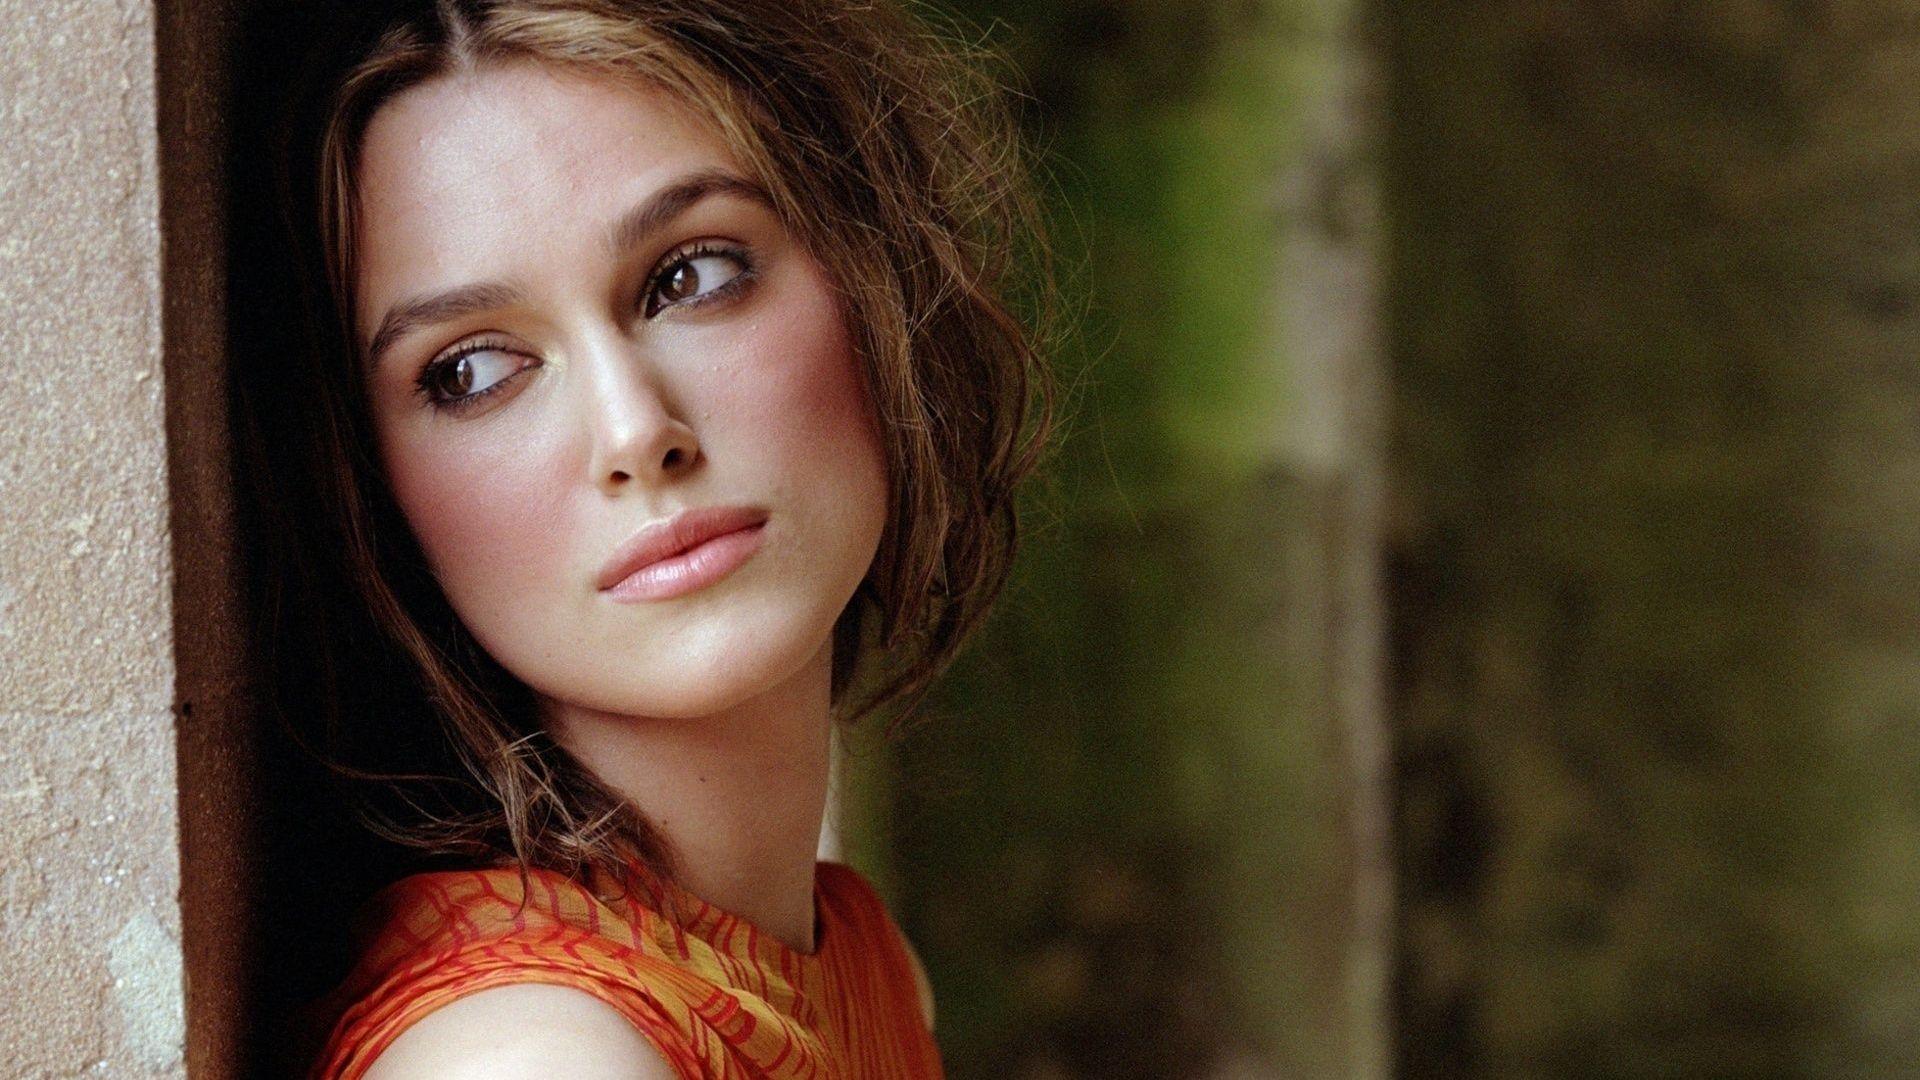 Keira Knightley Wallpaper. Hollywwod, Bollywood Actor, Actress Wallpaper for Your Desktop